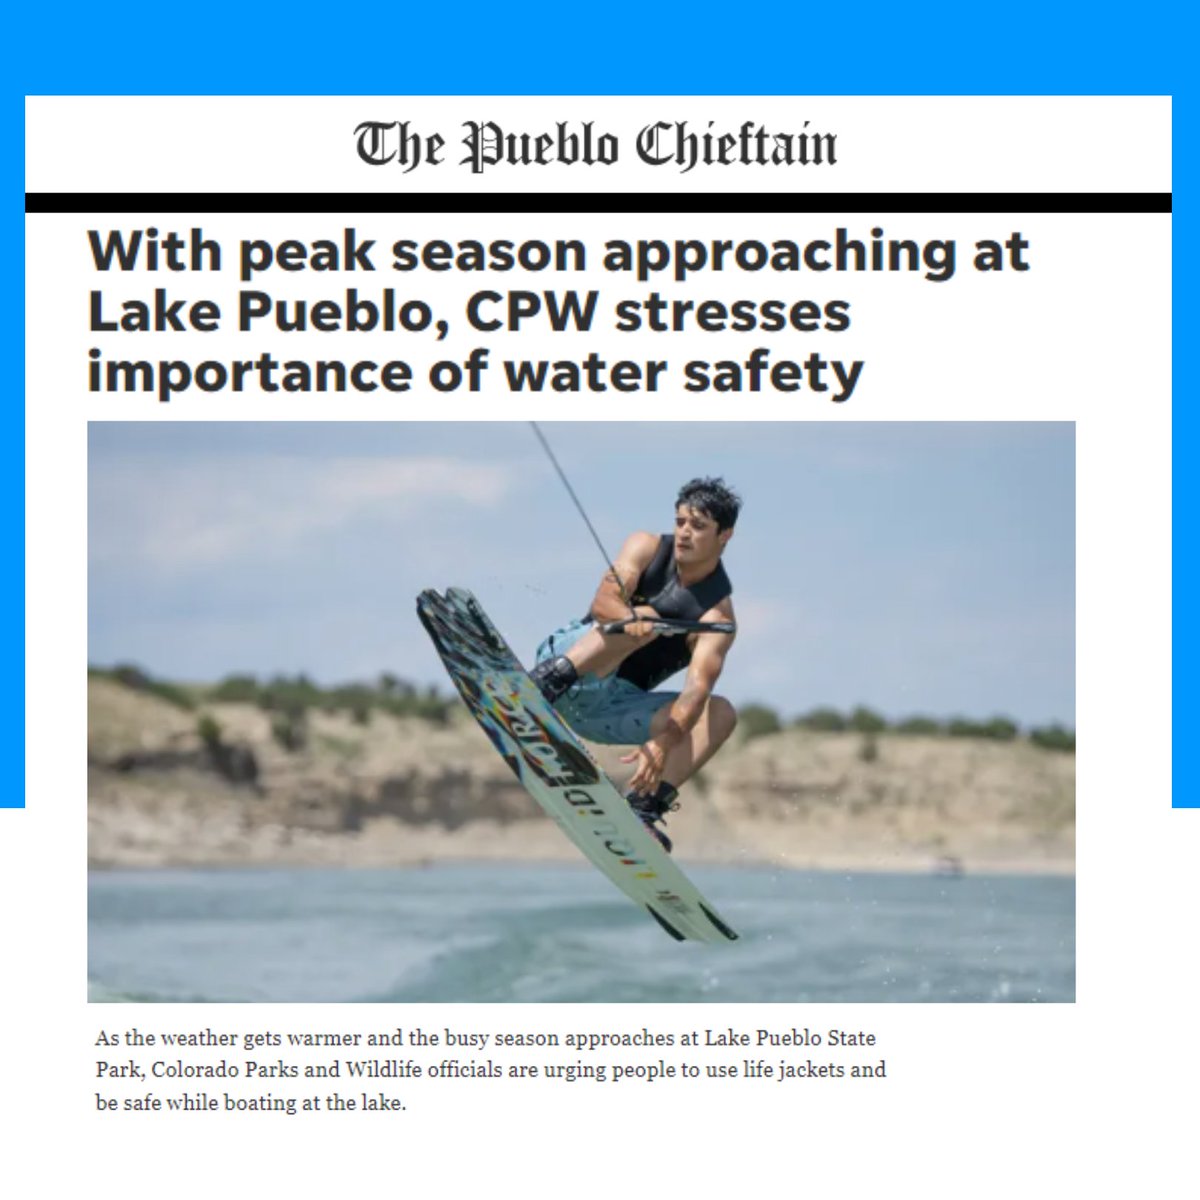 During the summer, it's important to prioritize safety when enjoying lake activities. Always wear a life jacket when boating or participating in water sports, and be mindful of water depth and currents. ow.ly/QbbM50RJTUm